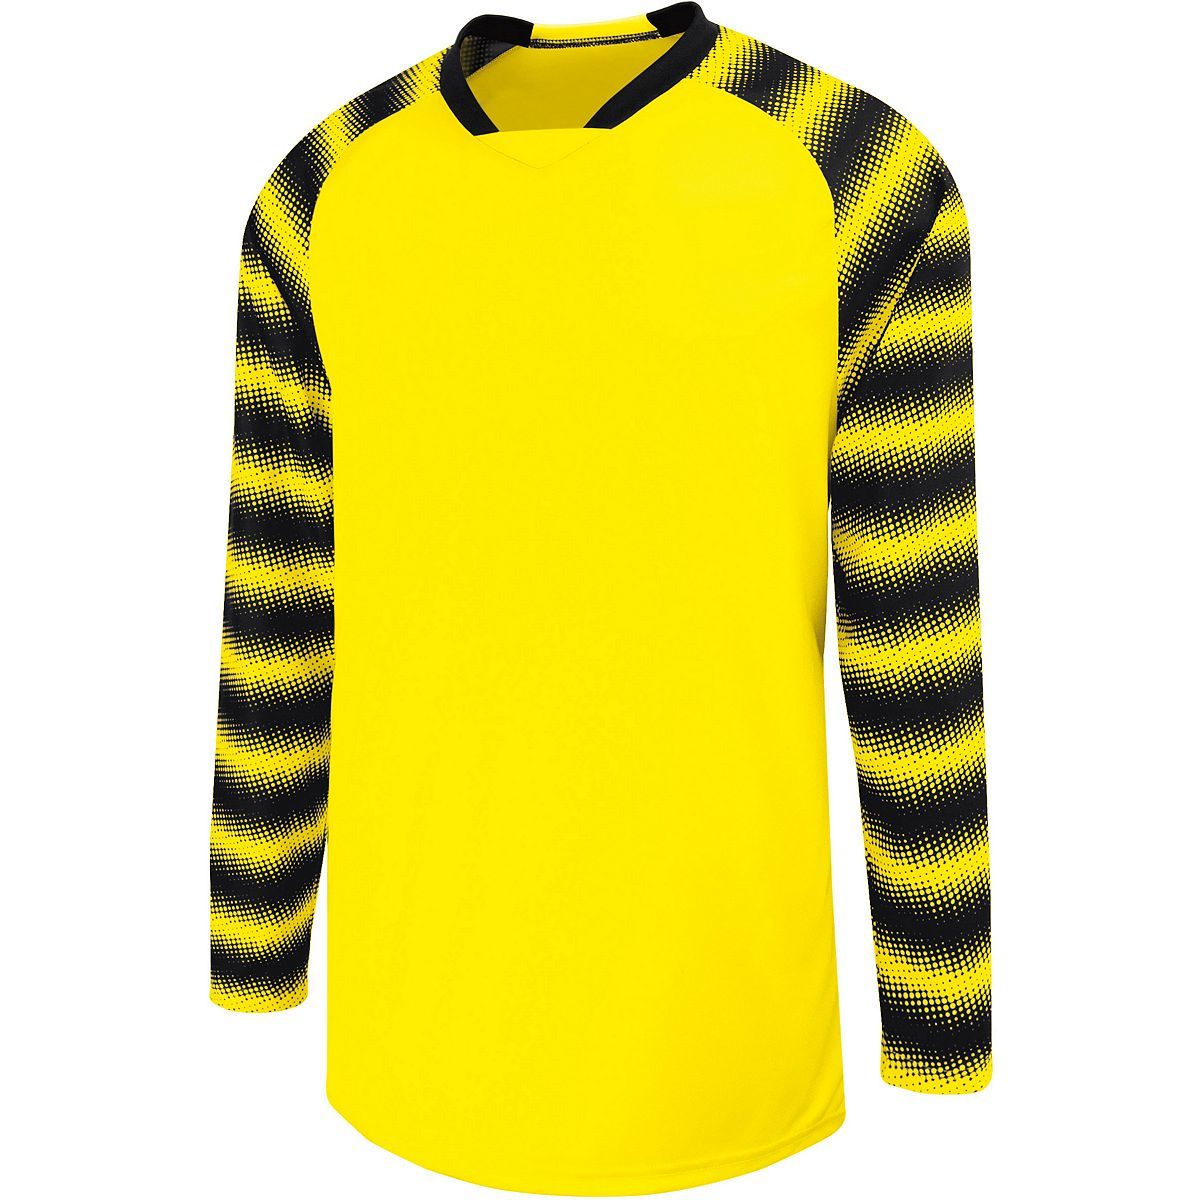 High 5 Youth Prism Goalkeeper Jersey in Power Yellow/Black  -Part of the Youth, Youth-Jersey, High5-Products, Soccer, Shirts, All-Sports-1 product lines at KanaleyCreations.com